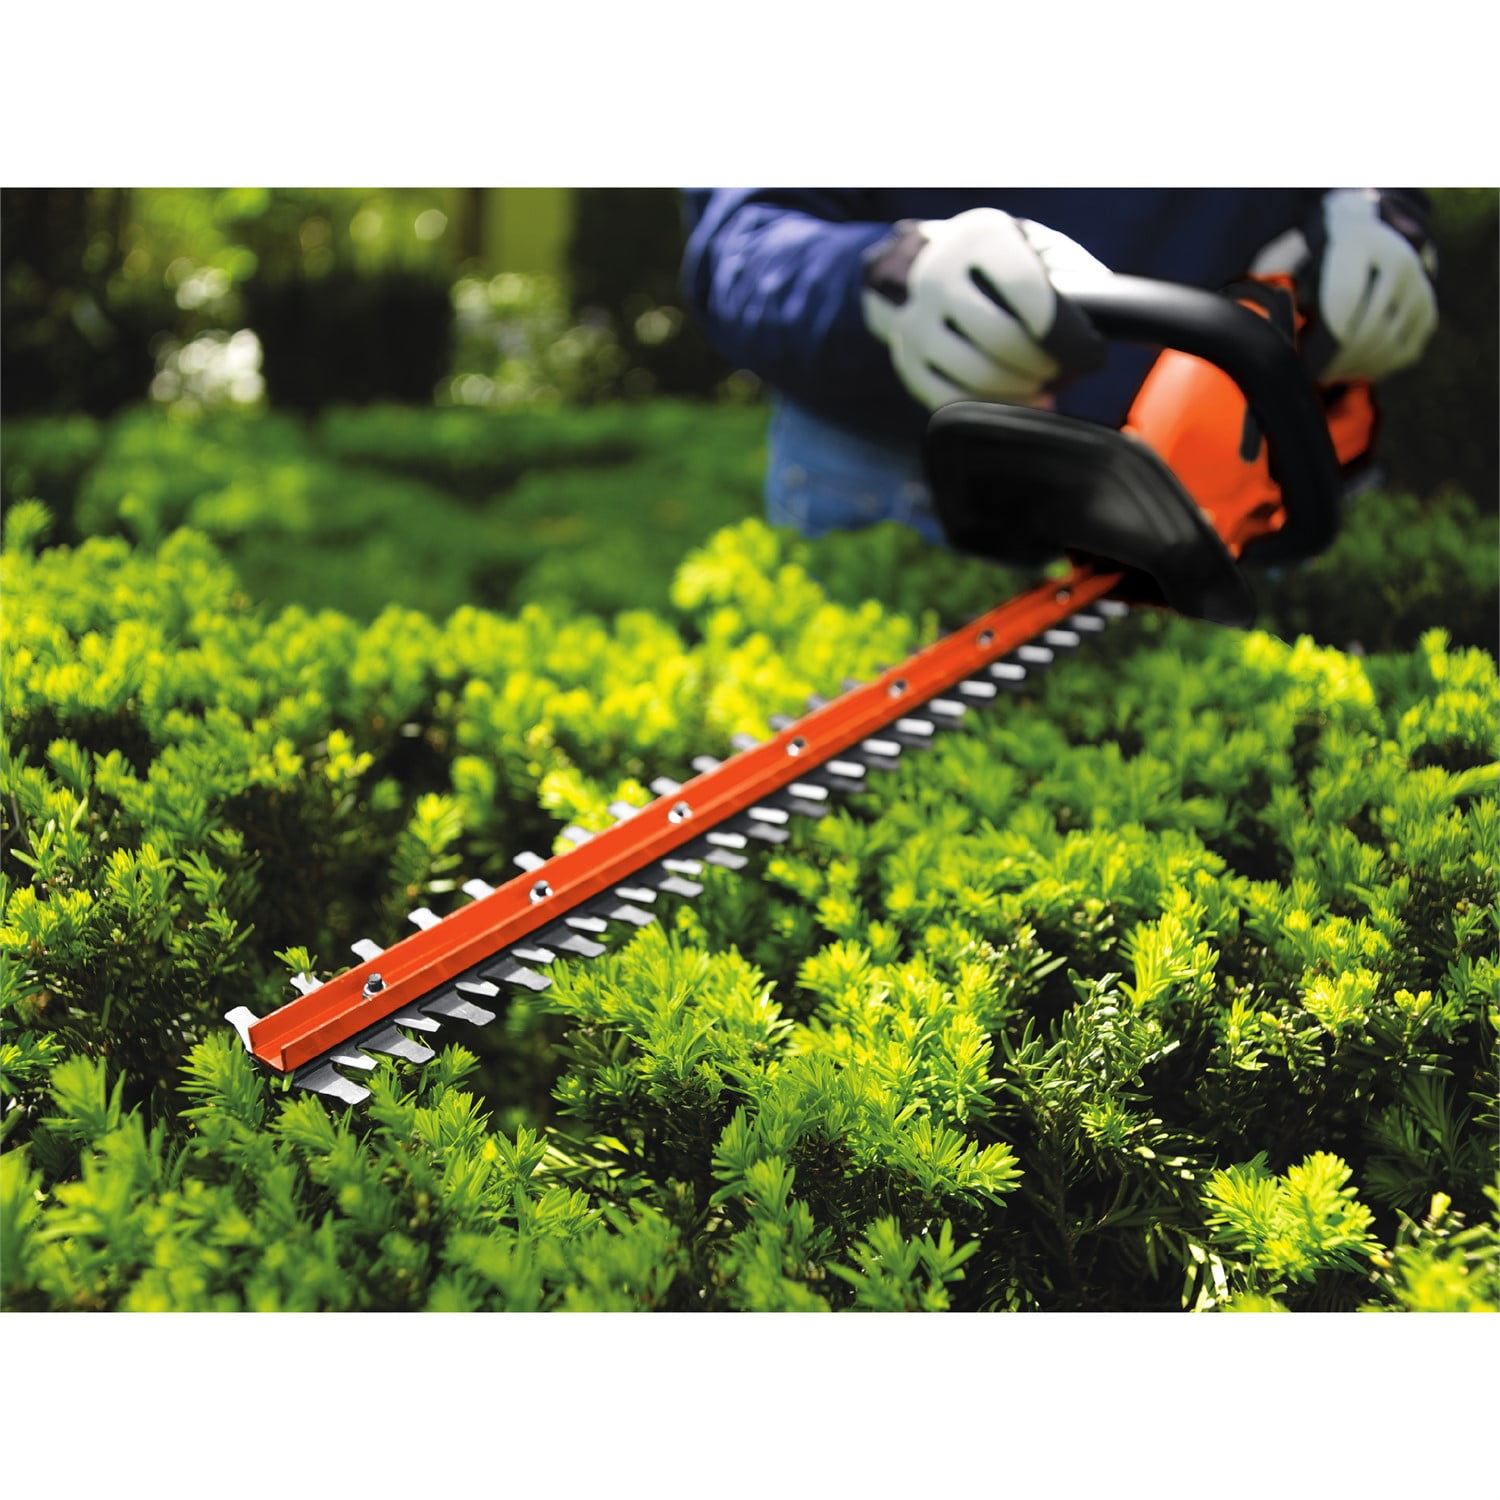 BLACK+DECKER 20V MAX Cordless Hedge Trimmer with Power Command Powercut,  22-Inch (LHT321FF)